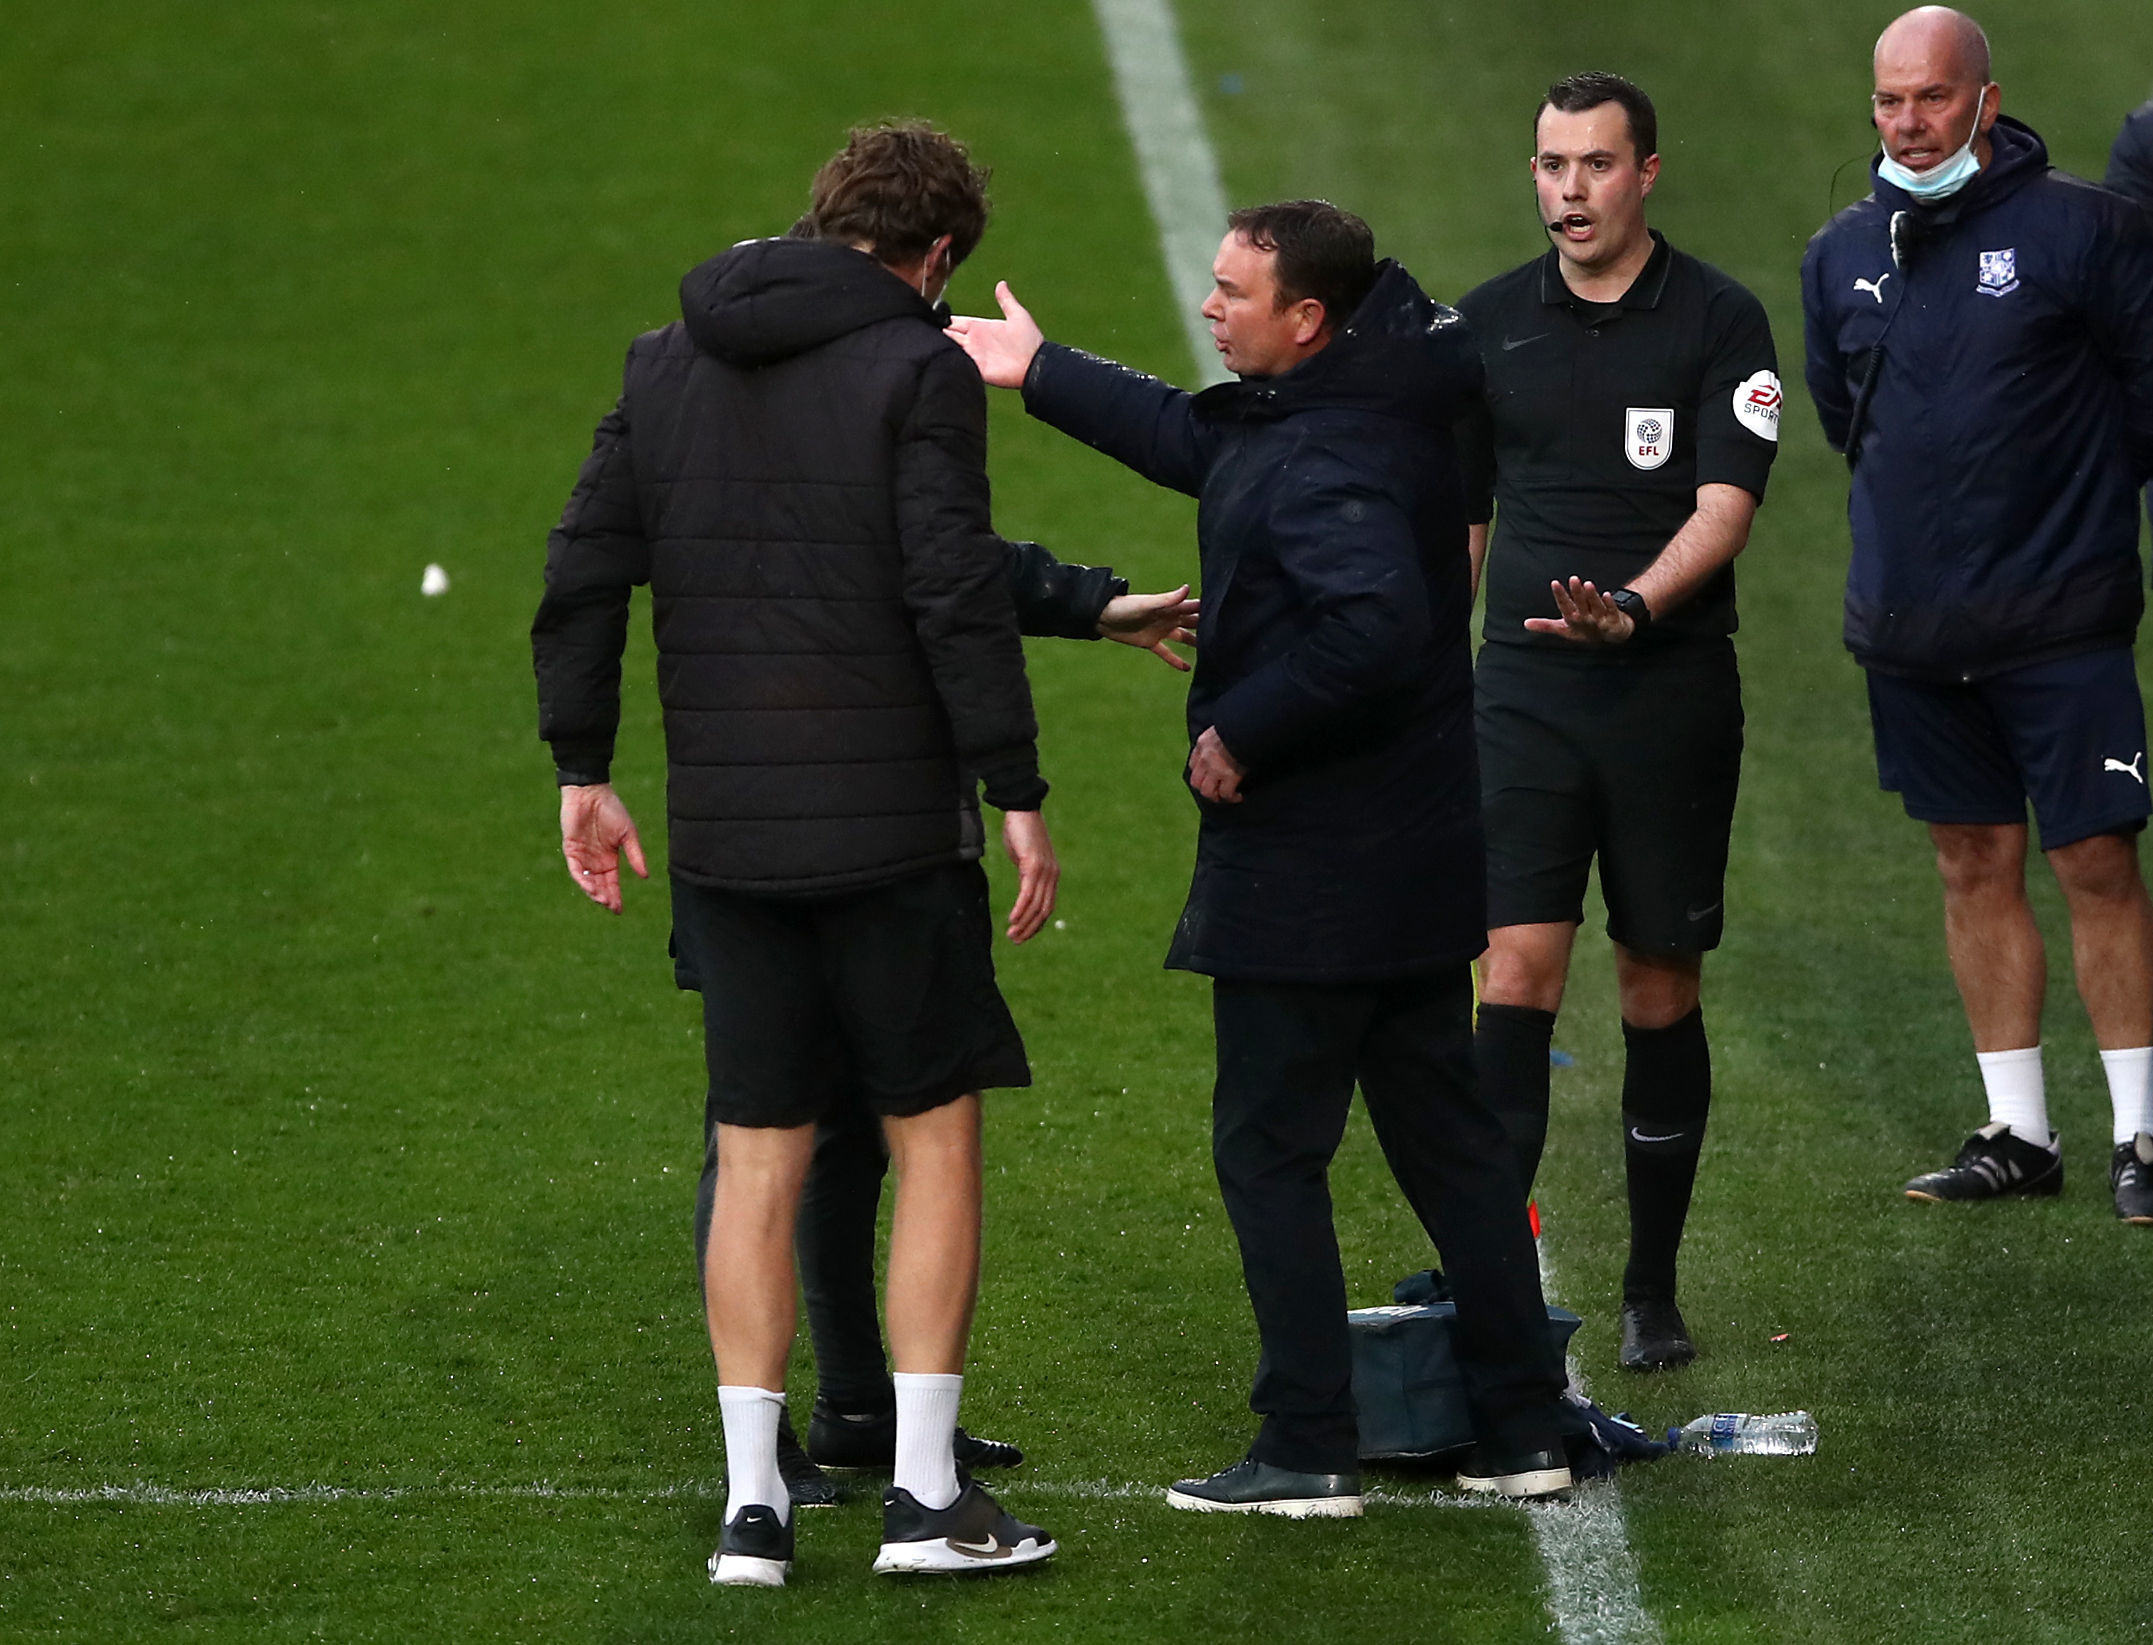 Morecambe manager Derek Adams argues with the officials during the Sky Bet League two, play-off semi final at Prenton Park, Tranmere. Picture date: Thursday May 20, 2021. PA Photo. See PA story SOCCER Tranmere. Photo credit should read: Tim Goode/PA